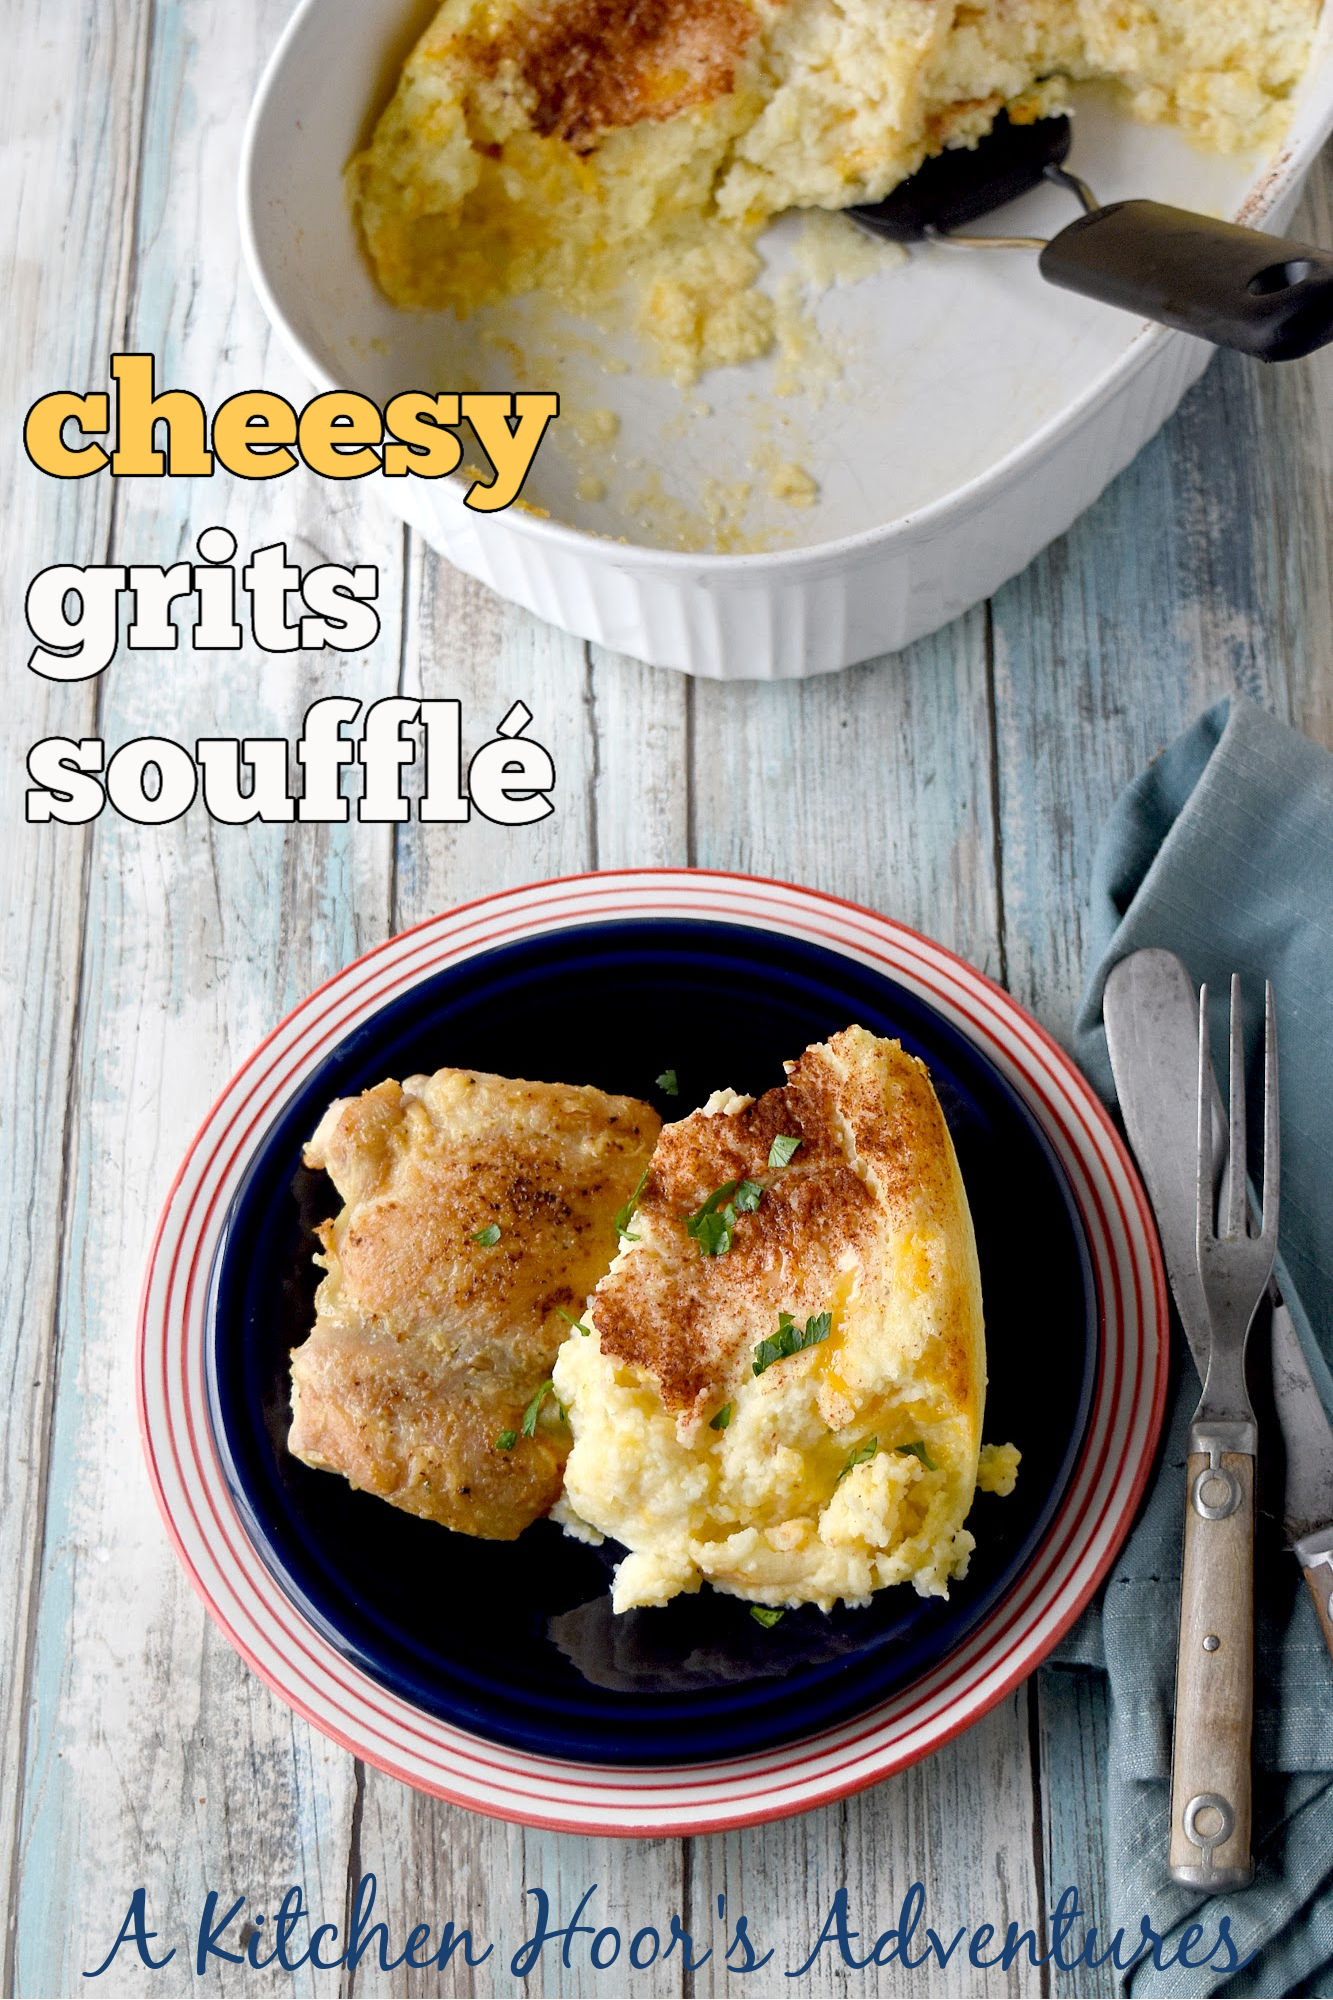 Elevate your holiday celebrations with our Cheesy Grits Soufflé recipe. This scrumptious dish is the side dish you've been waiting for. #HolidaySideDishes #GritsLove #CheesyGrits #GritsSouffle #CheesyGoodness #GritsRecipes